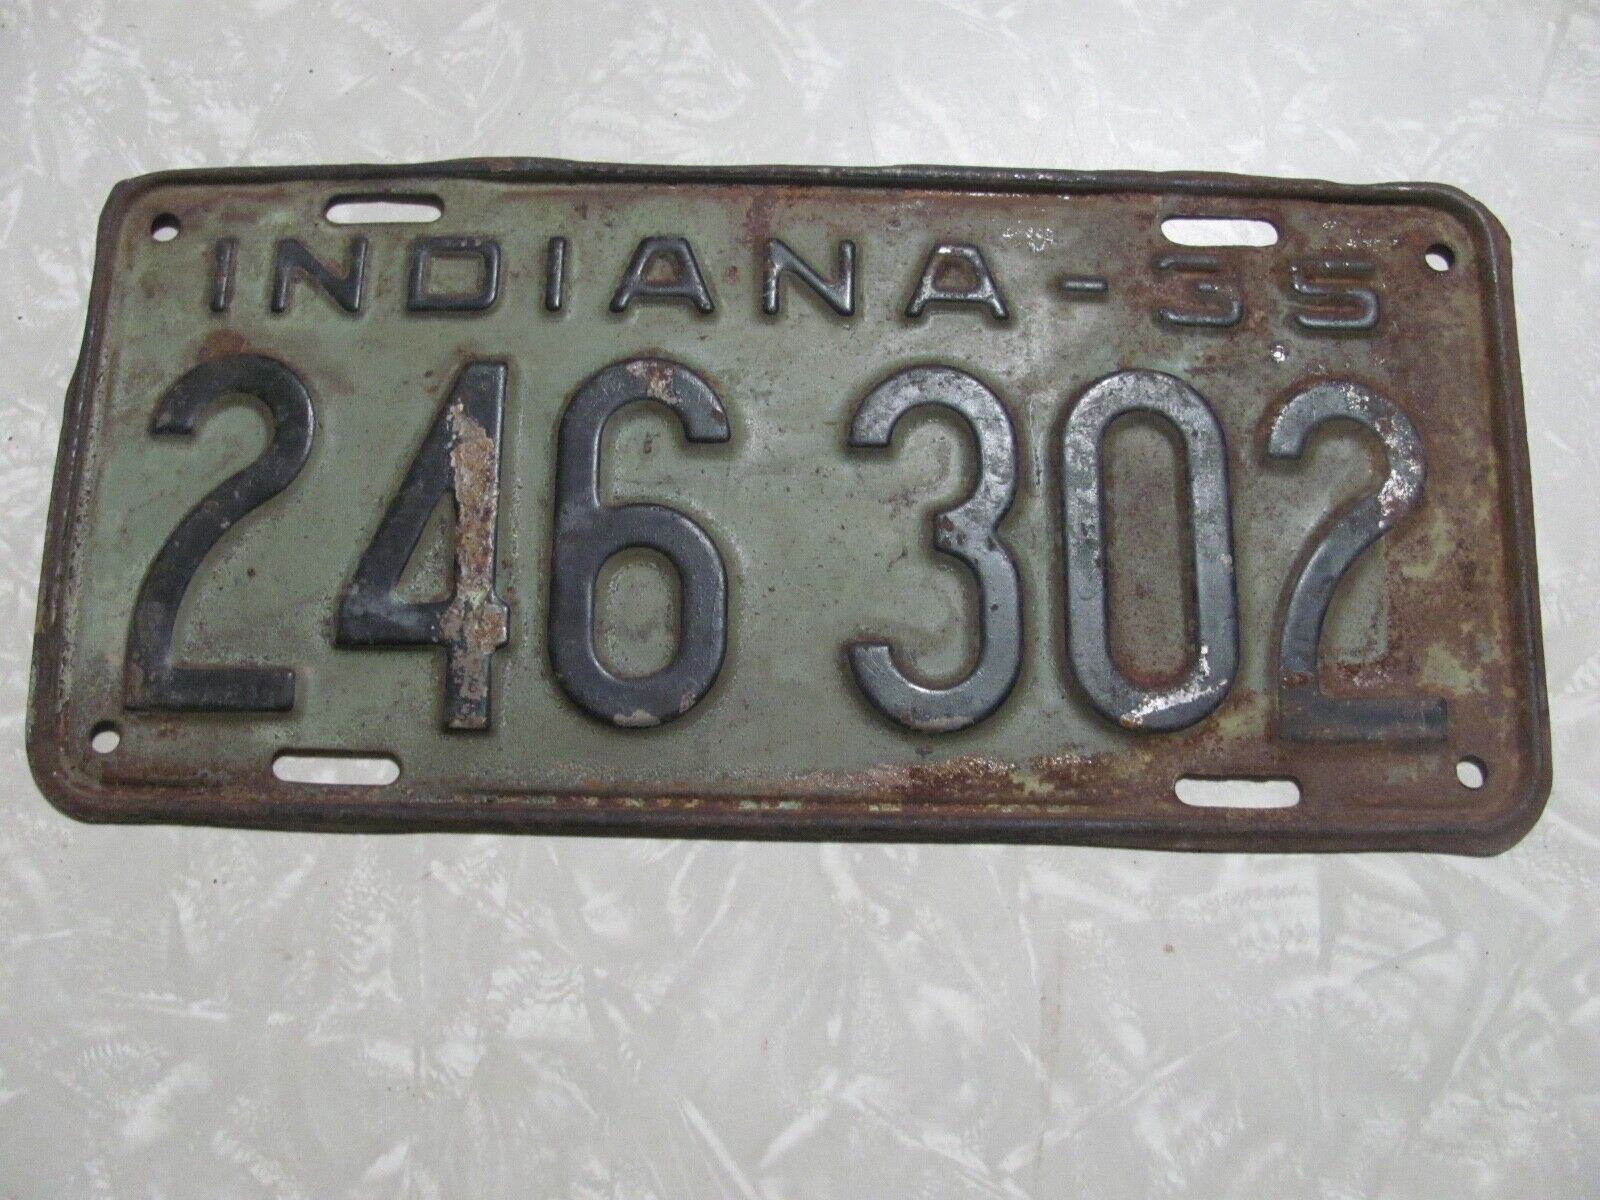 1935 INDIANA LICENSE PLATE    246302